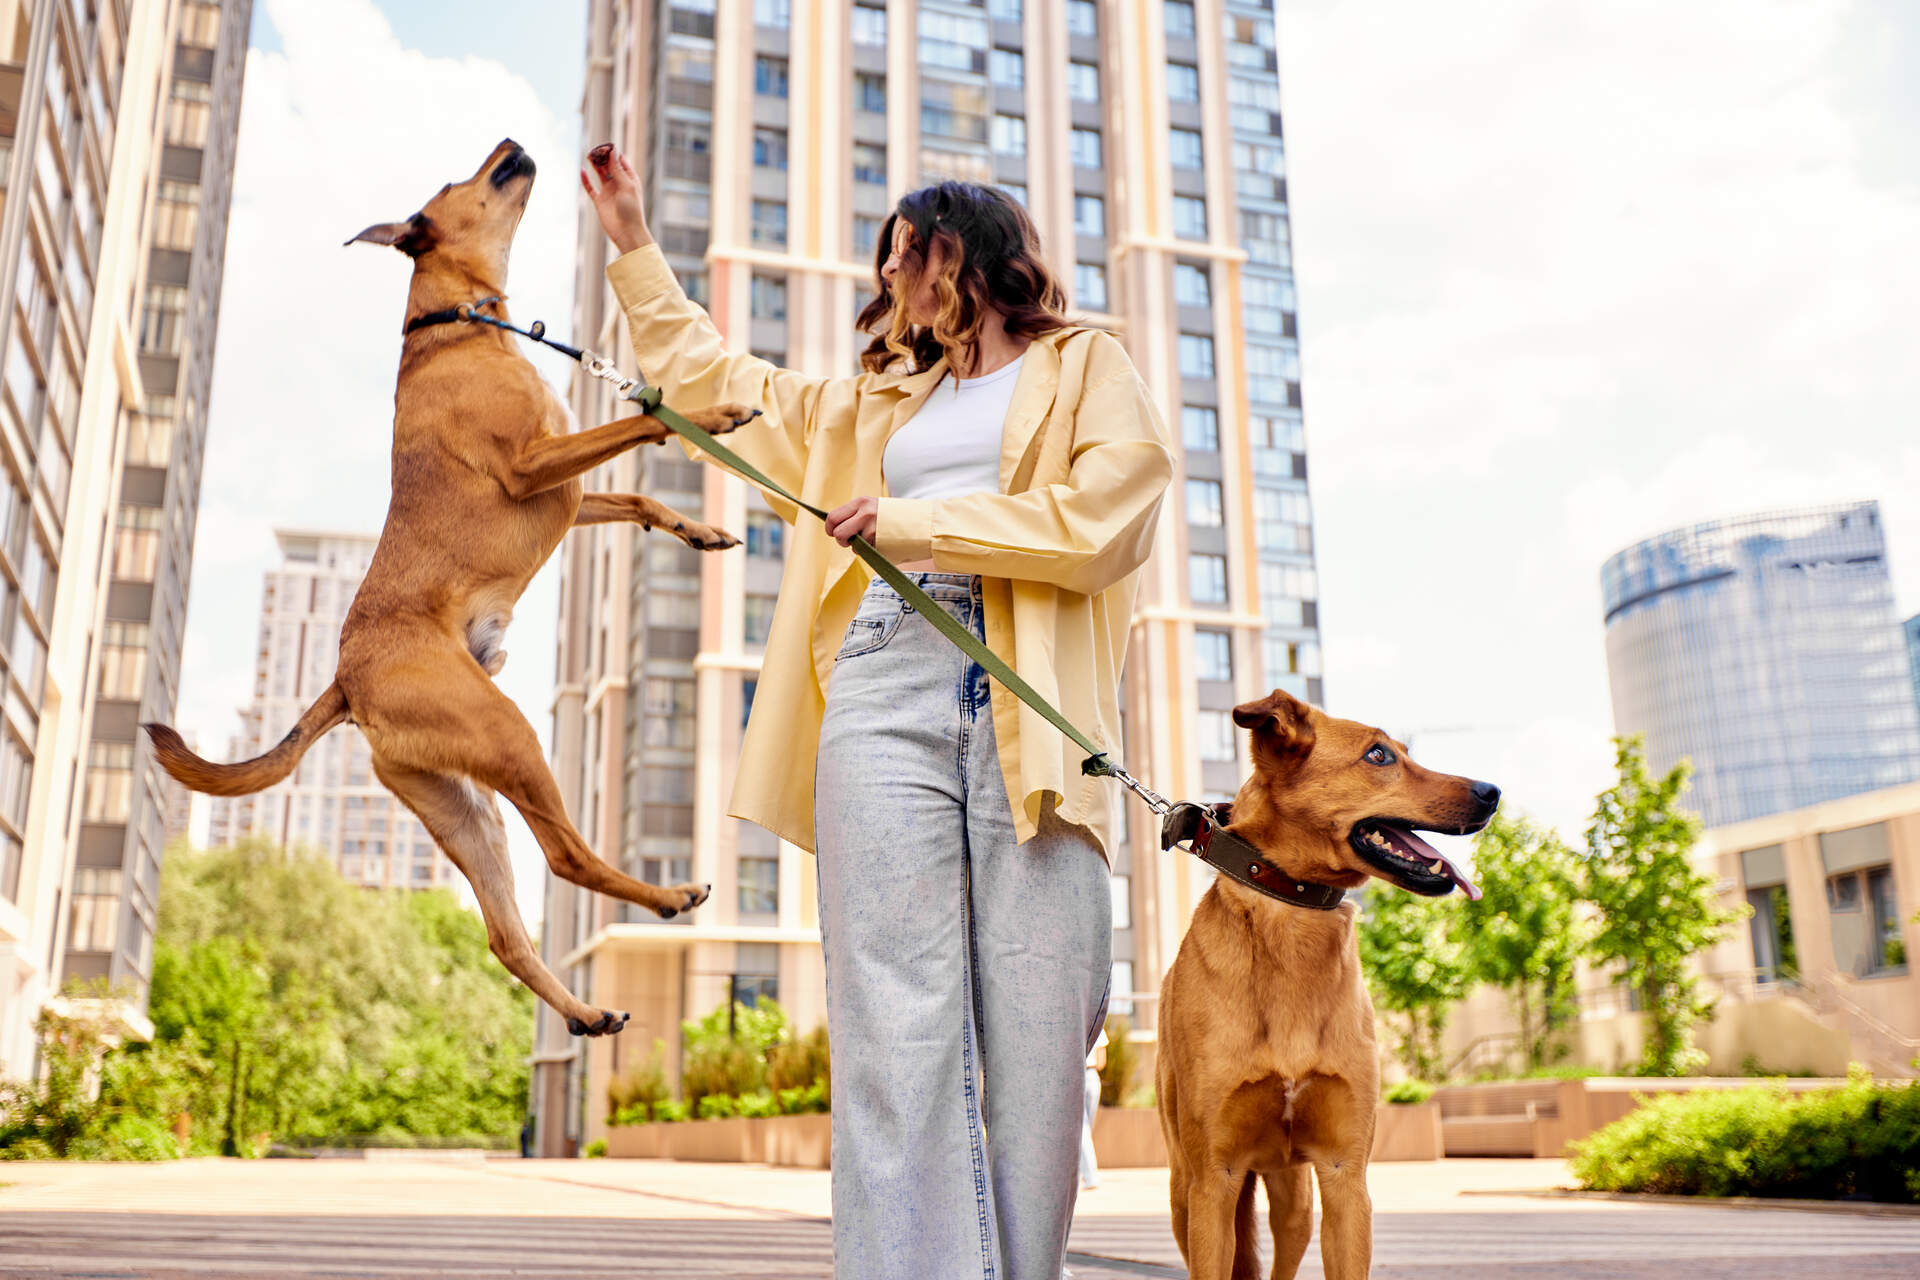 A woman walking two city dogs on leash